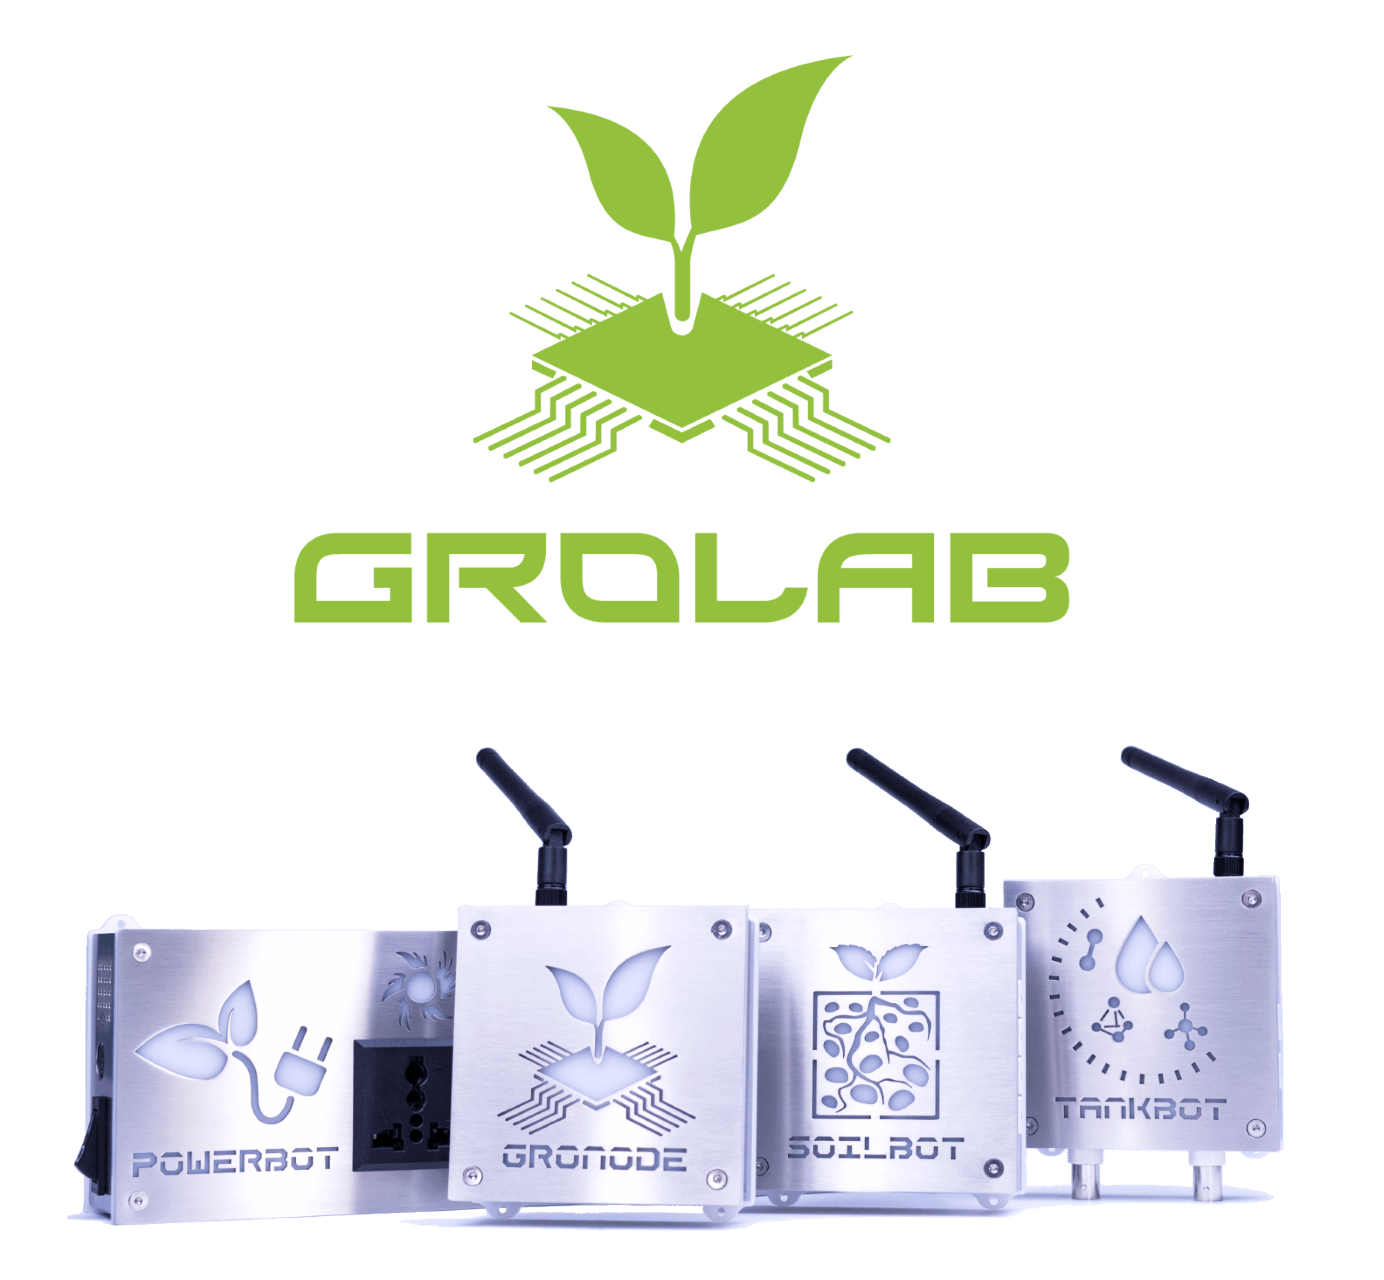 GroLab™ the grow controller created by Open Grow™ - Featuring GroNode, PowerBot, TankBot and Soilbot